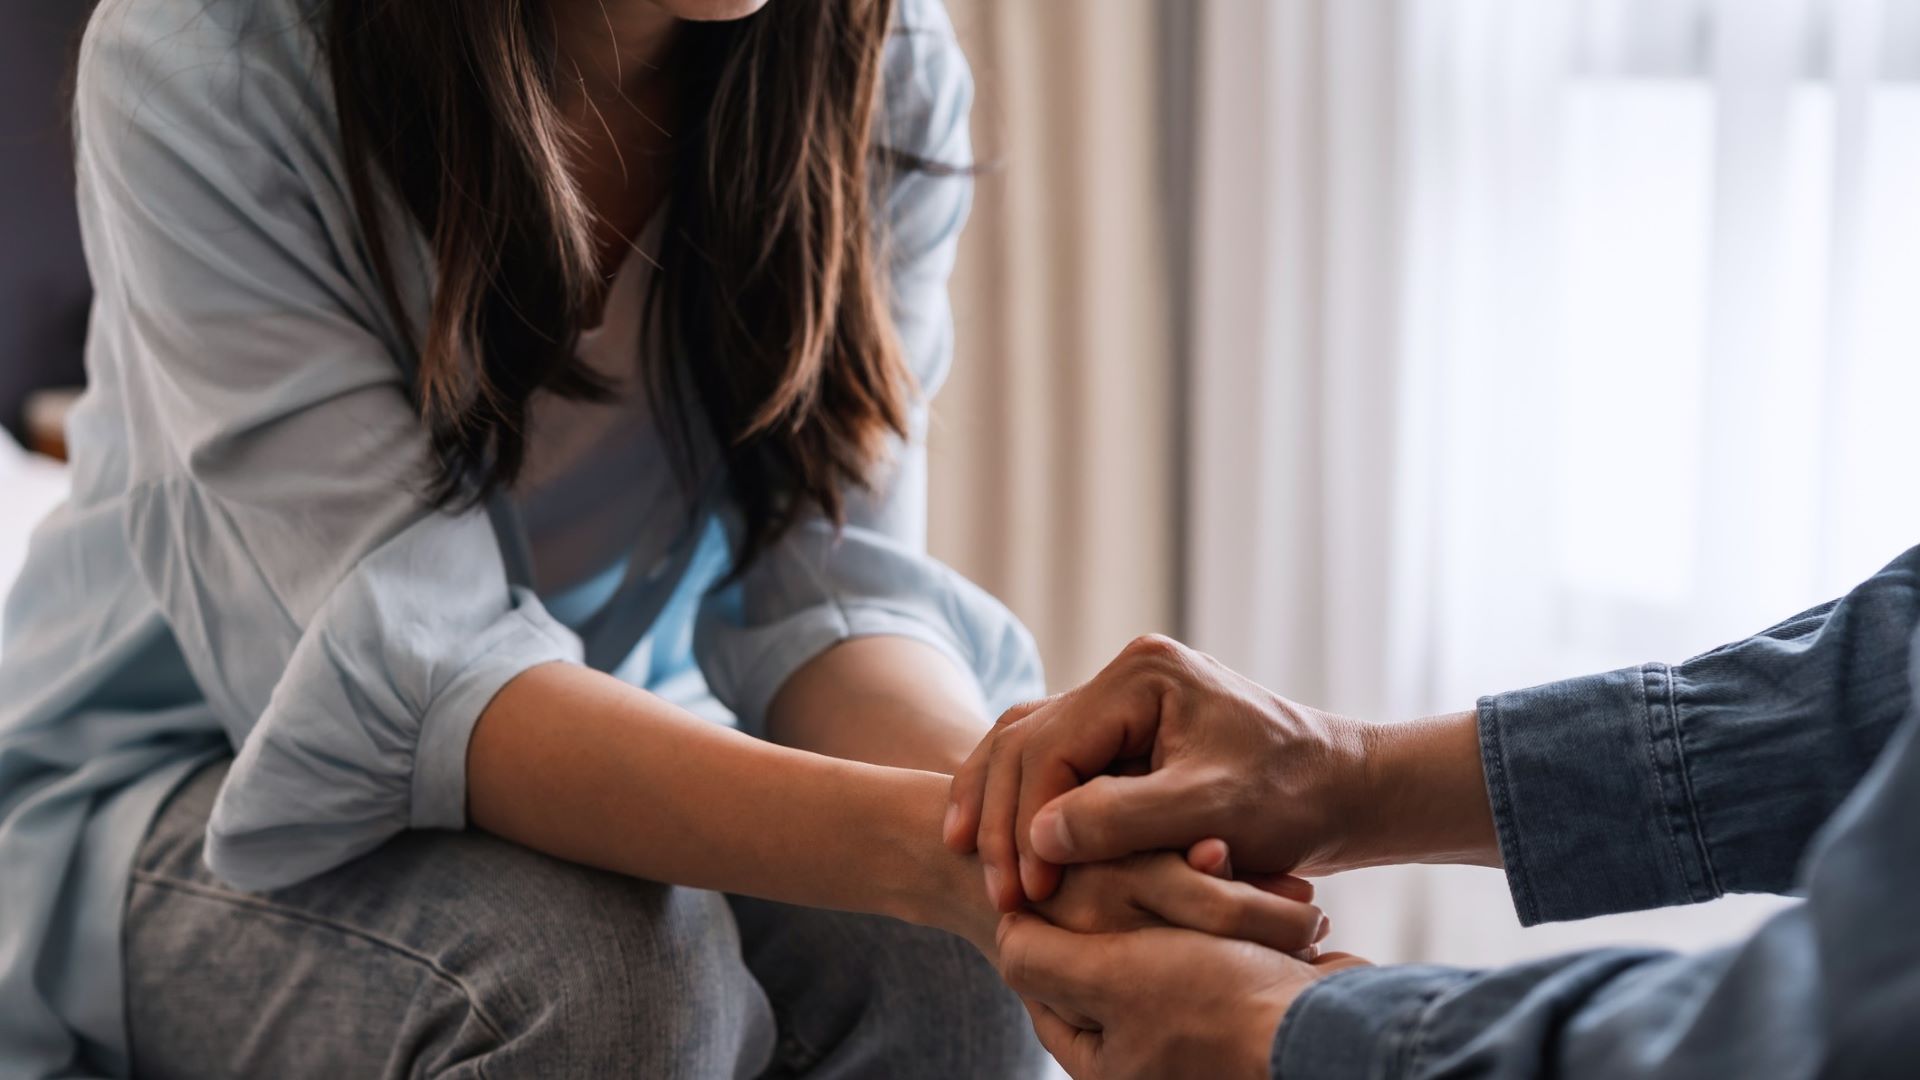 Two individuals hold each other's hands in a sign of comforting the other in this stock image.